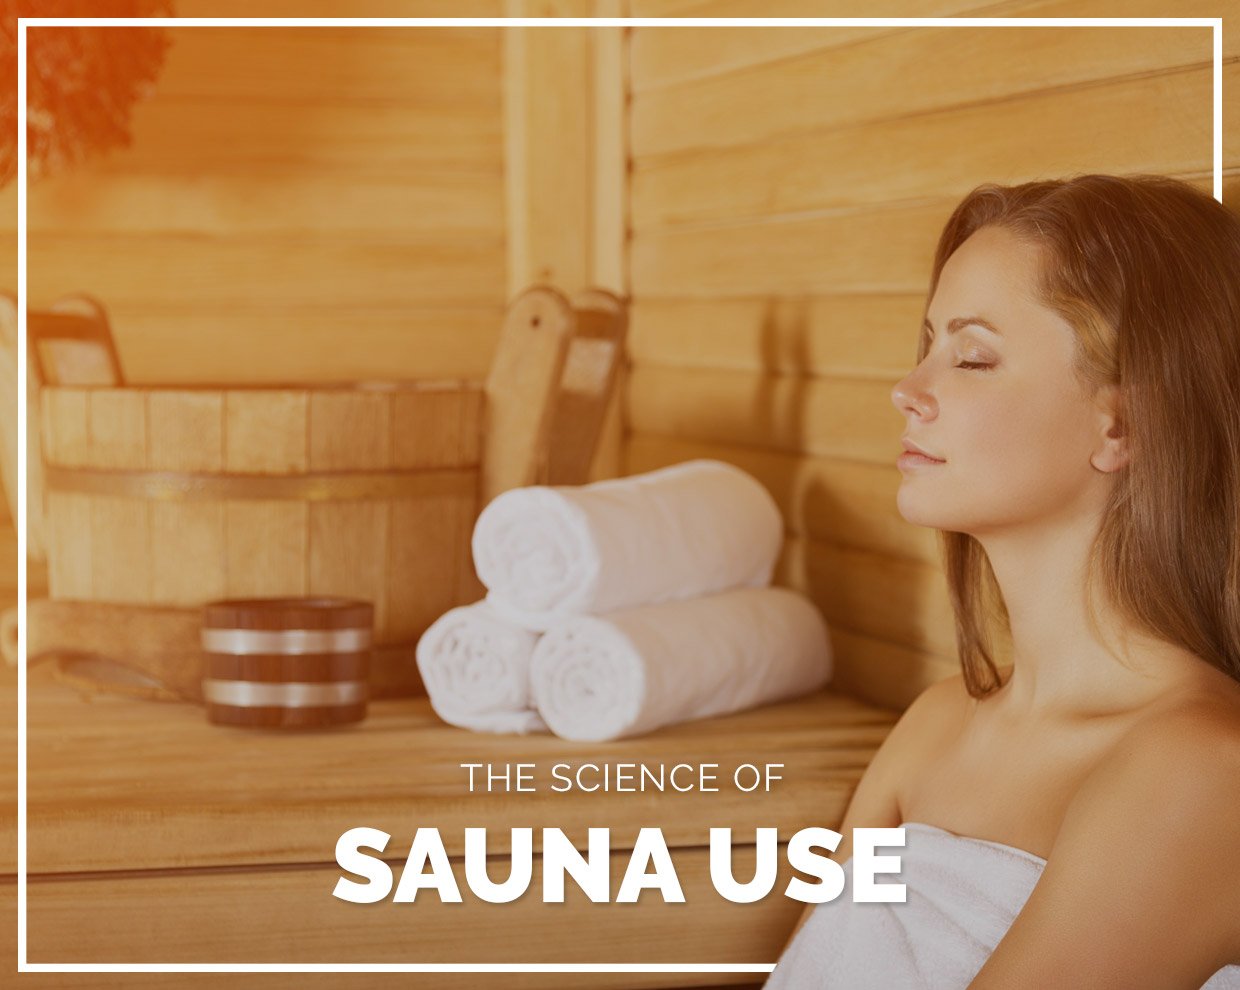 The science of sauna use